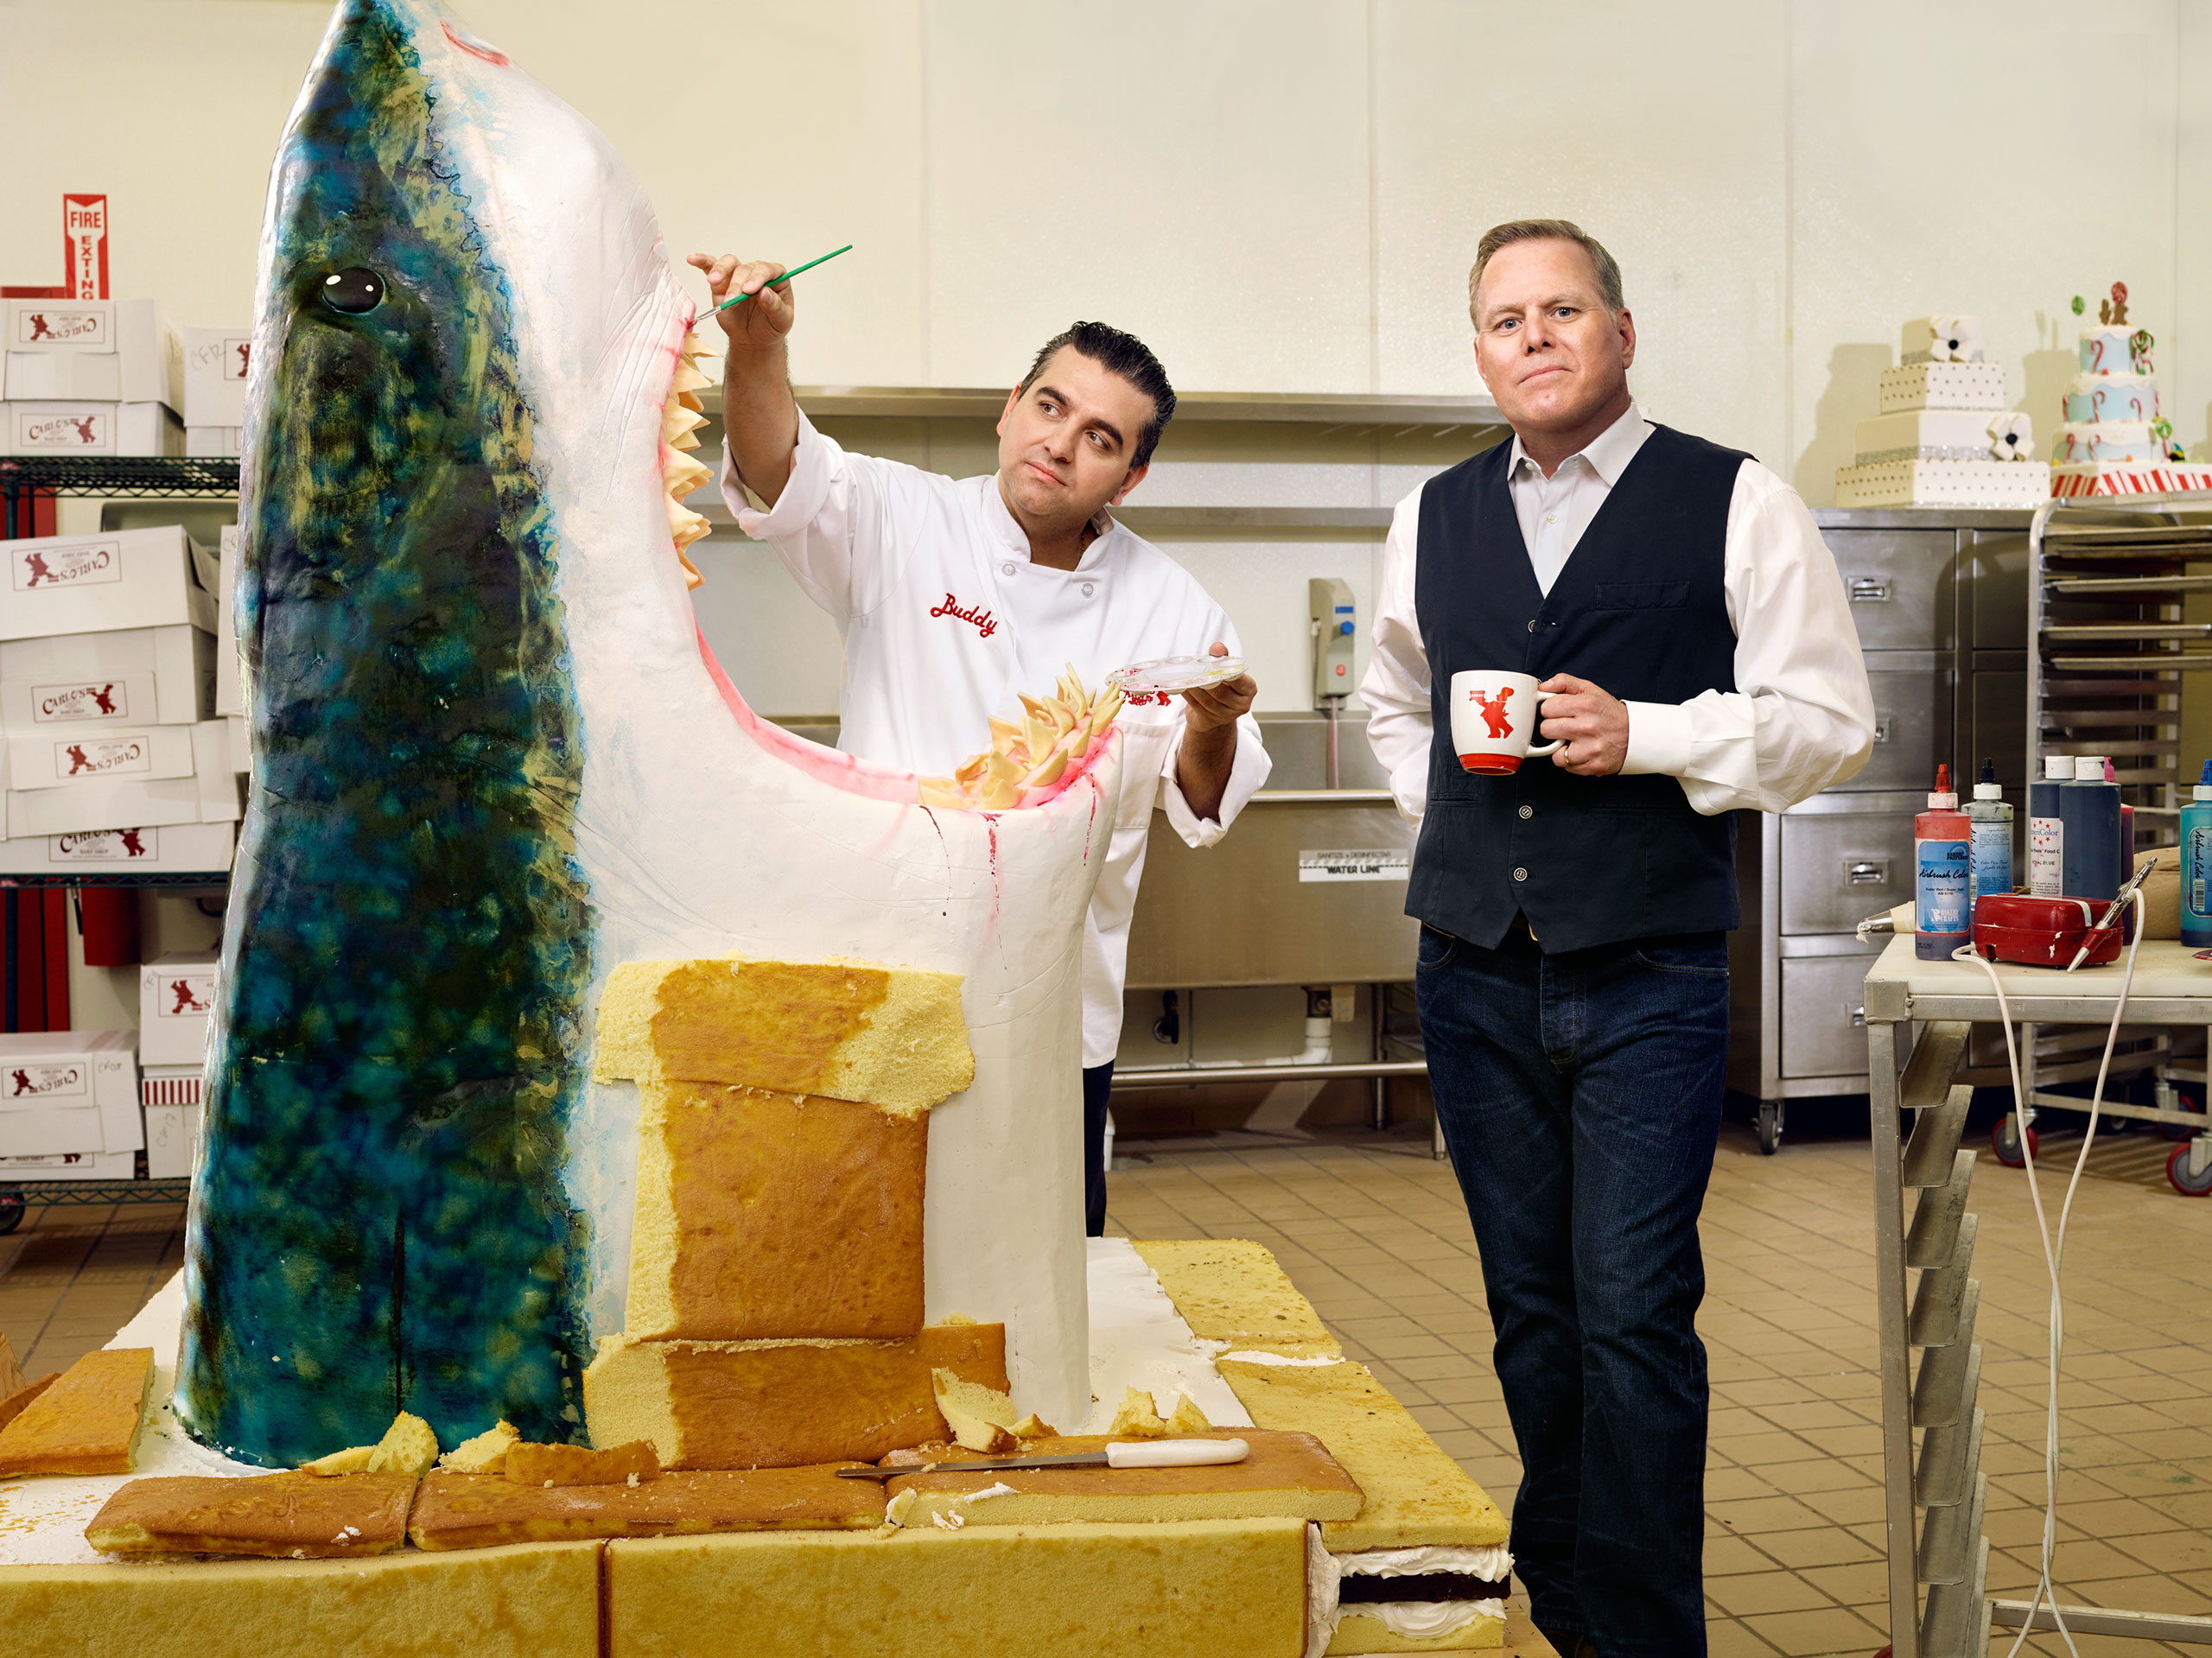 Cake Boss Buddy Valastro, left, and David Zaslav at a Carlo's bakery facility in Jersey City, N.J. From  The Cable Boss.  April 13, 2015 issue.